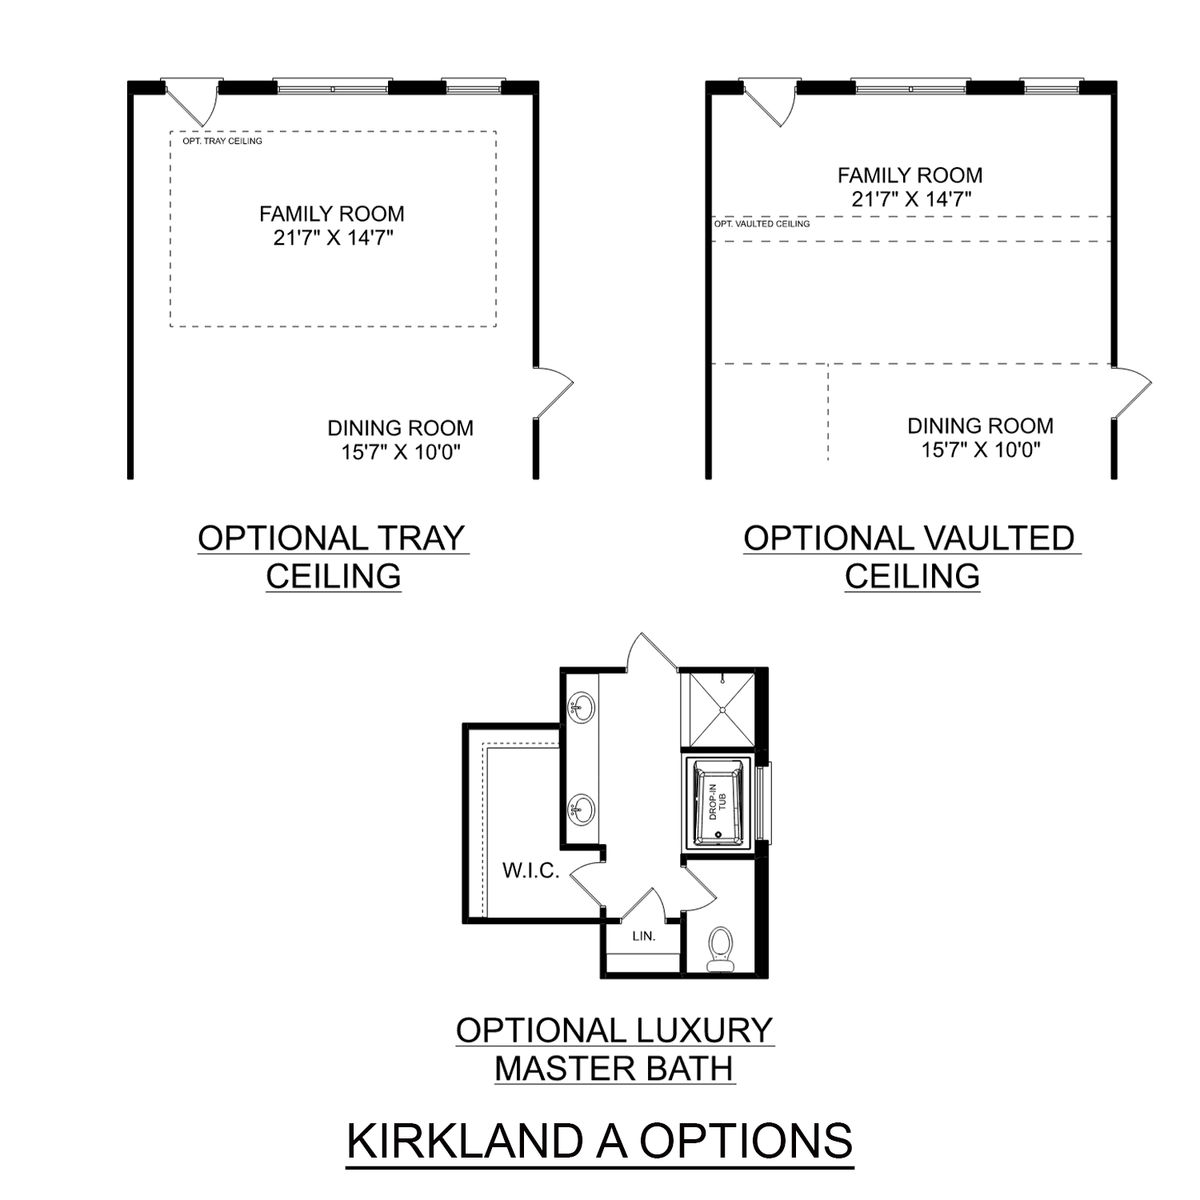 2 - The Kirkland floor plan layout for 102 Nellies Way in Davidson Homes' Pikes Ridge community.